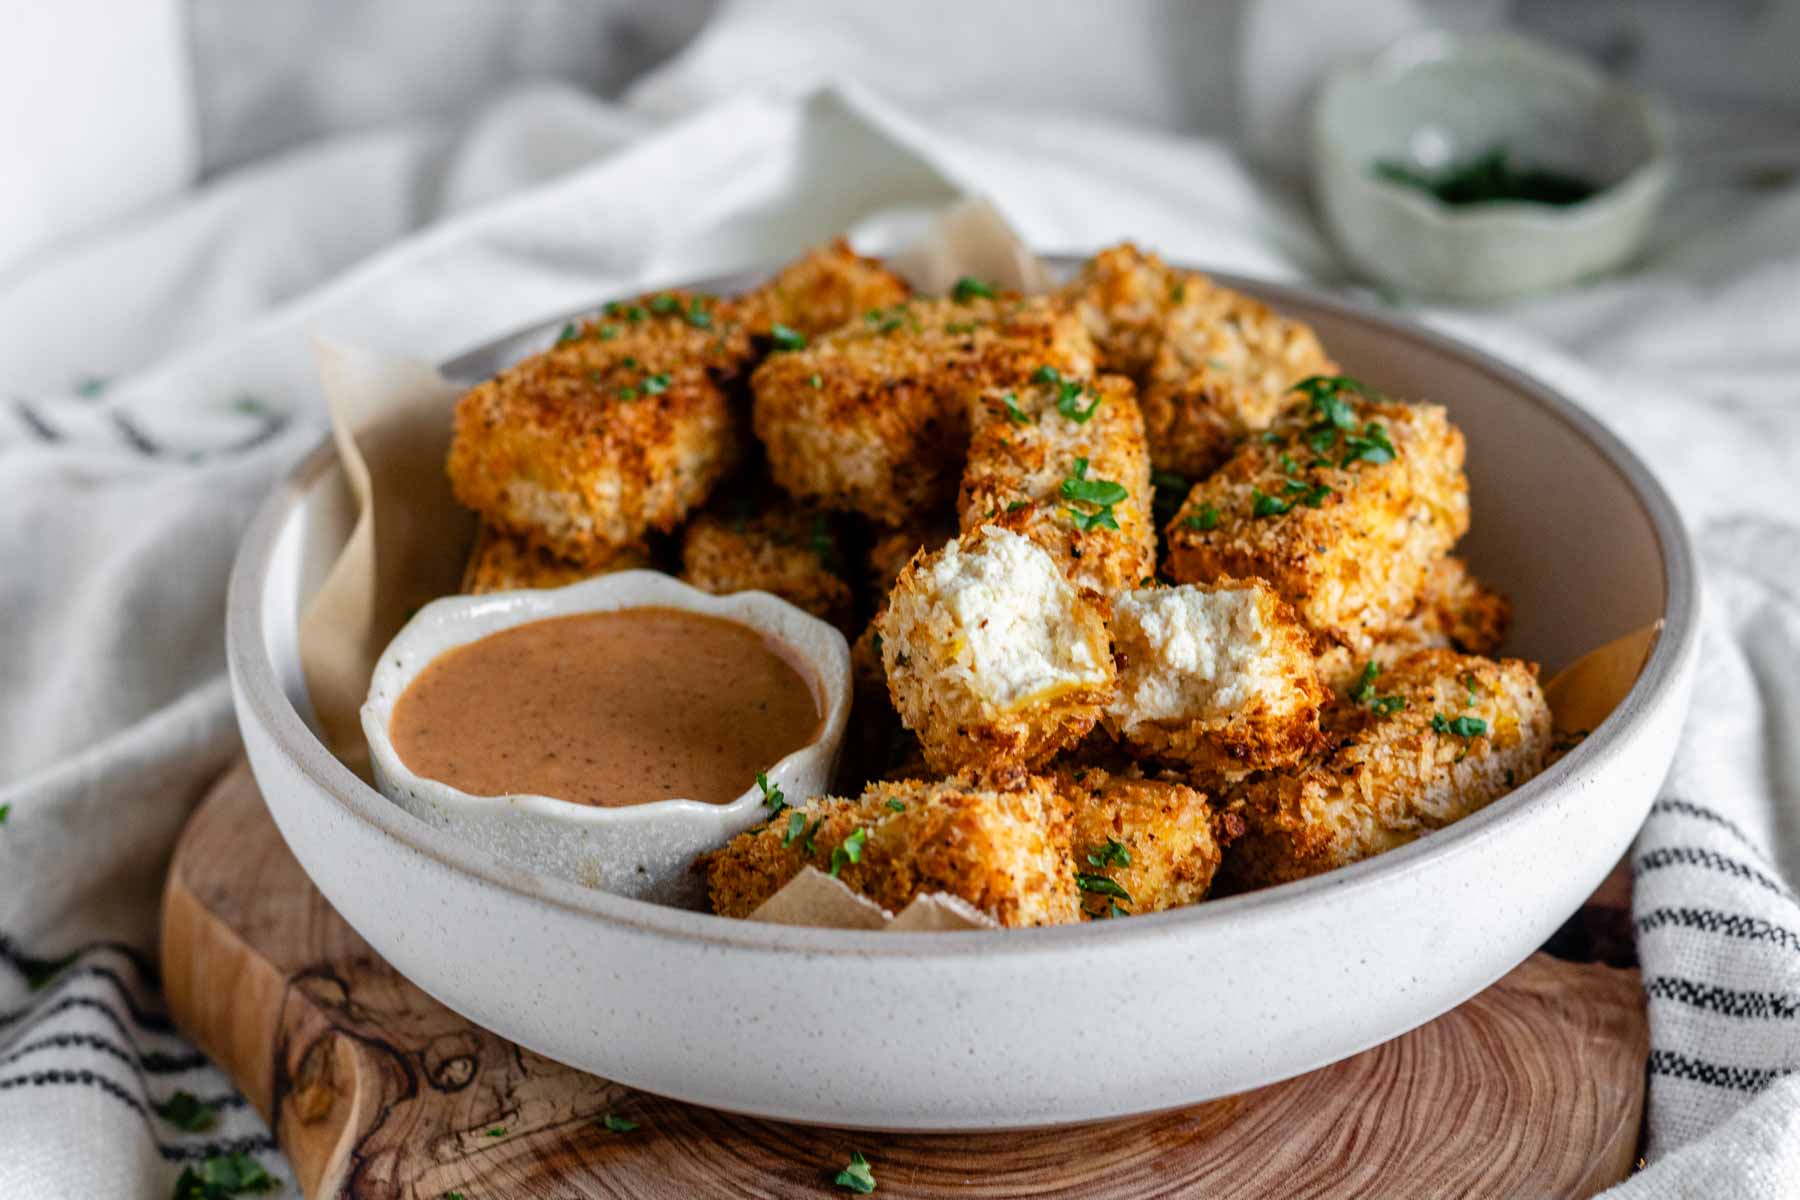 Tofu nuggets in a bowl with a sauce.